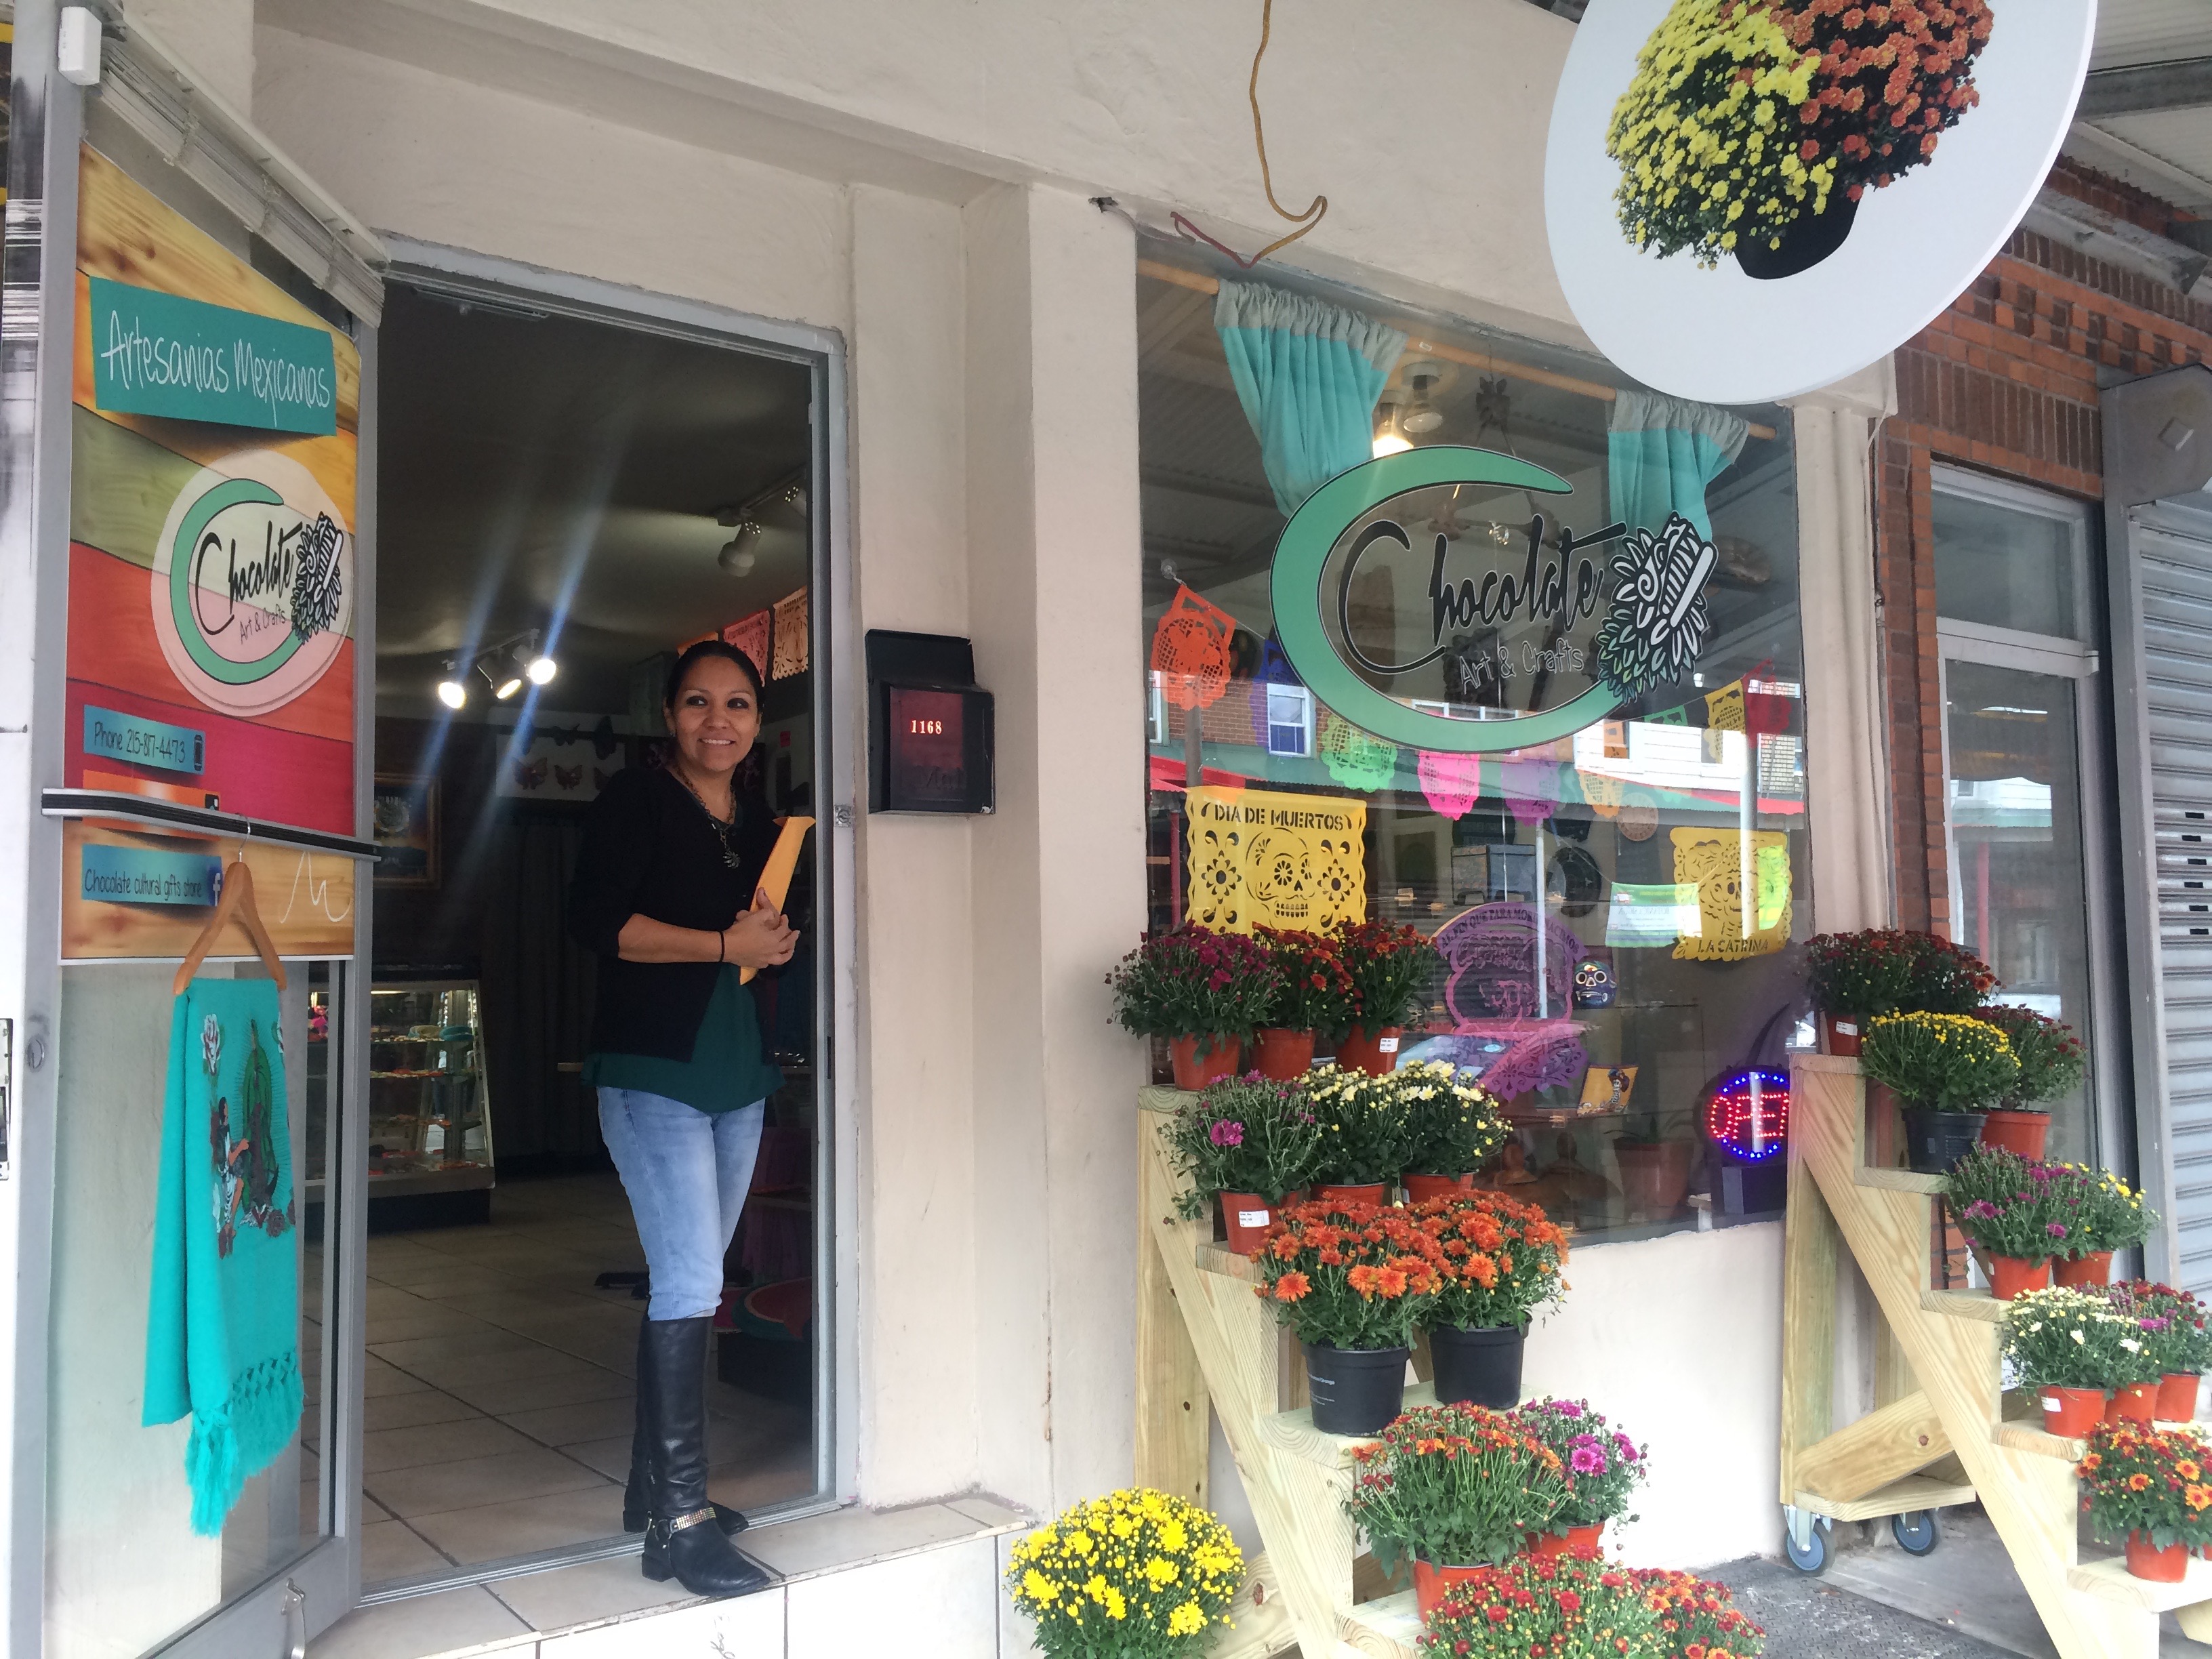 9th Street Stock Exchange: Mums from Betty Ann’s Italian Market Florist outside Chocolate Arts and Crafts. Owner Eva Hernández at the door. | Catalina Jaramillo